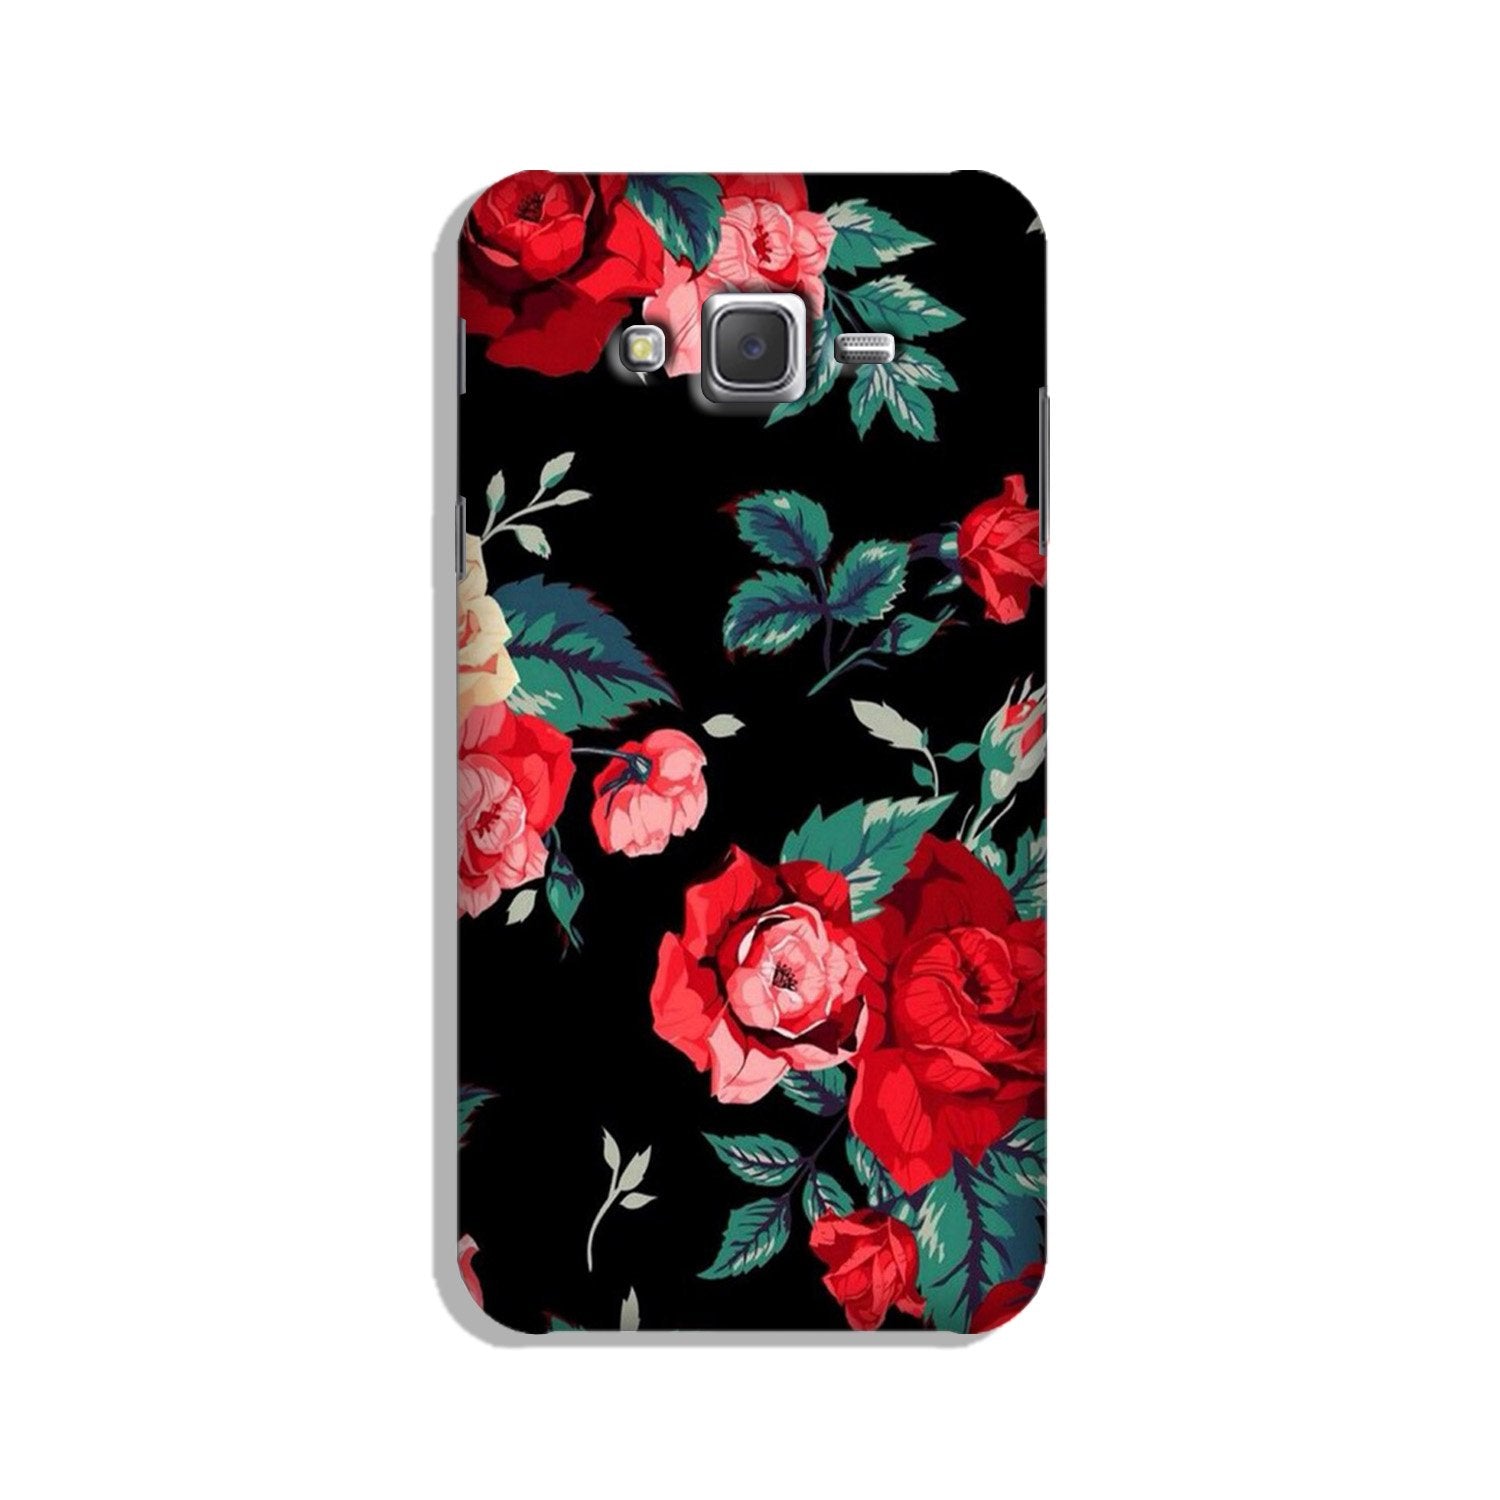 Red Rose2 Case for Galaxy J3 (2015)